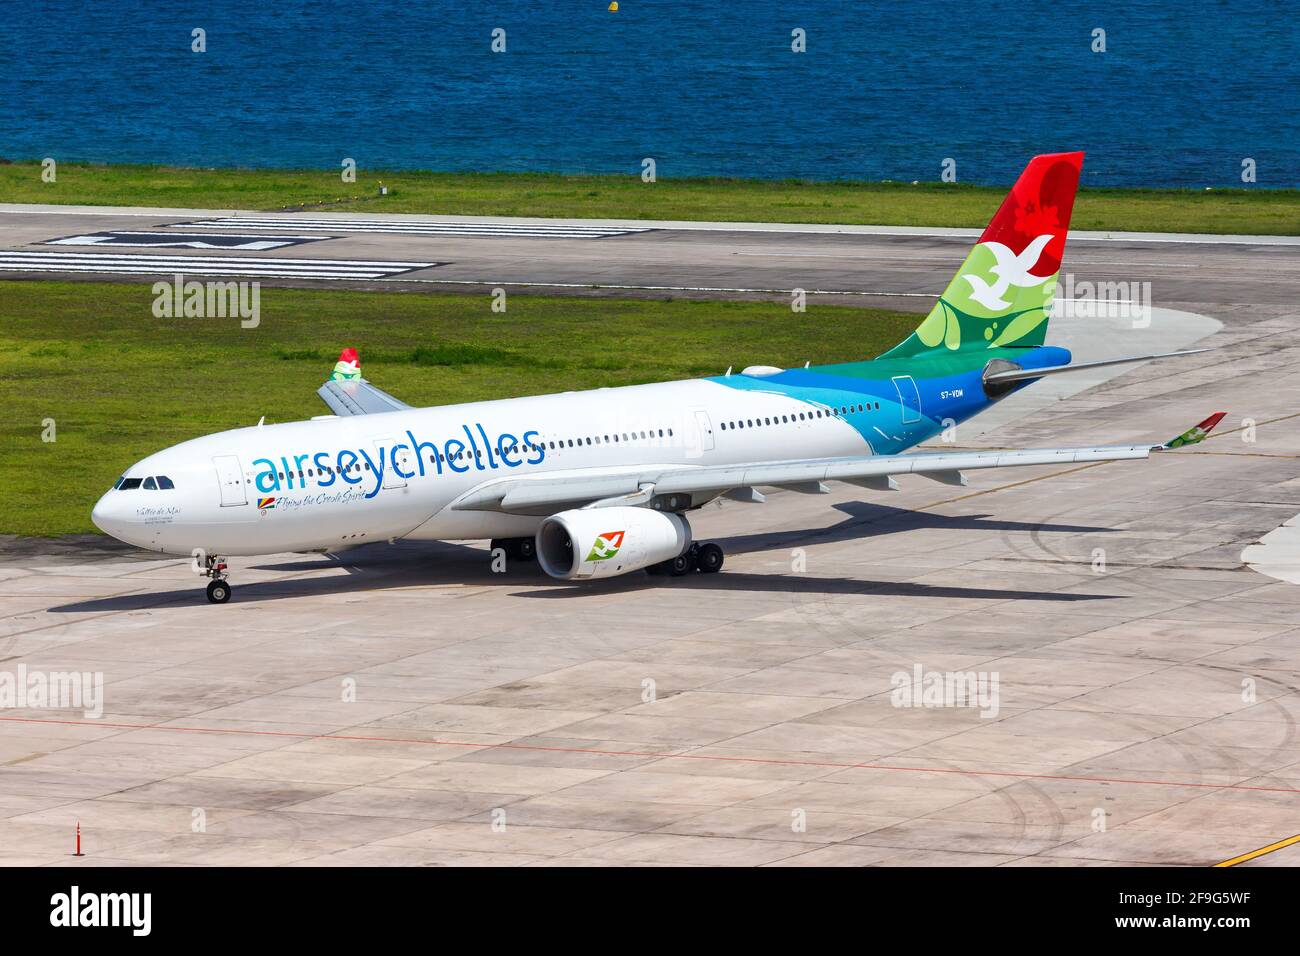 Mahe, Seychelles - November 24, 2017: Air Seychelles Airbus A330 airplane at Seychelles International Airport  (SEZ) in the Seychelles. Airbus is a Eu Stock Photo